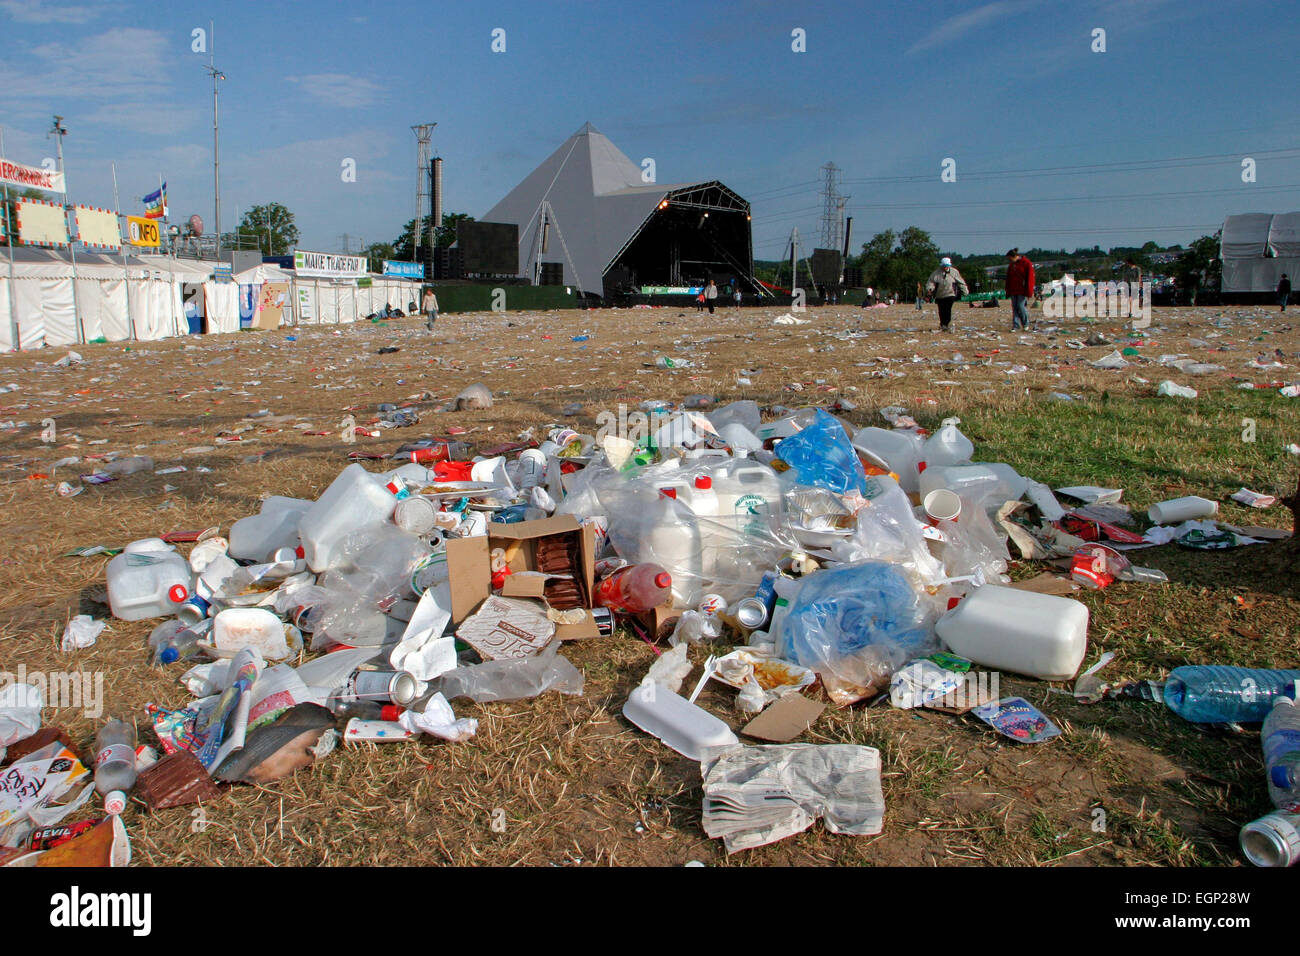 Litter around The Pyramid Stage after the Event, Glastonbury Music Festival, Pilton, Somerset, Britain - 29th June 2003 Stock Photo